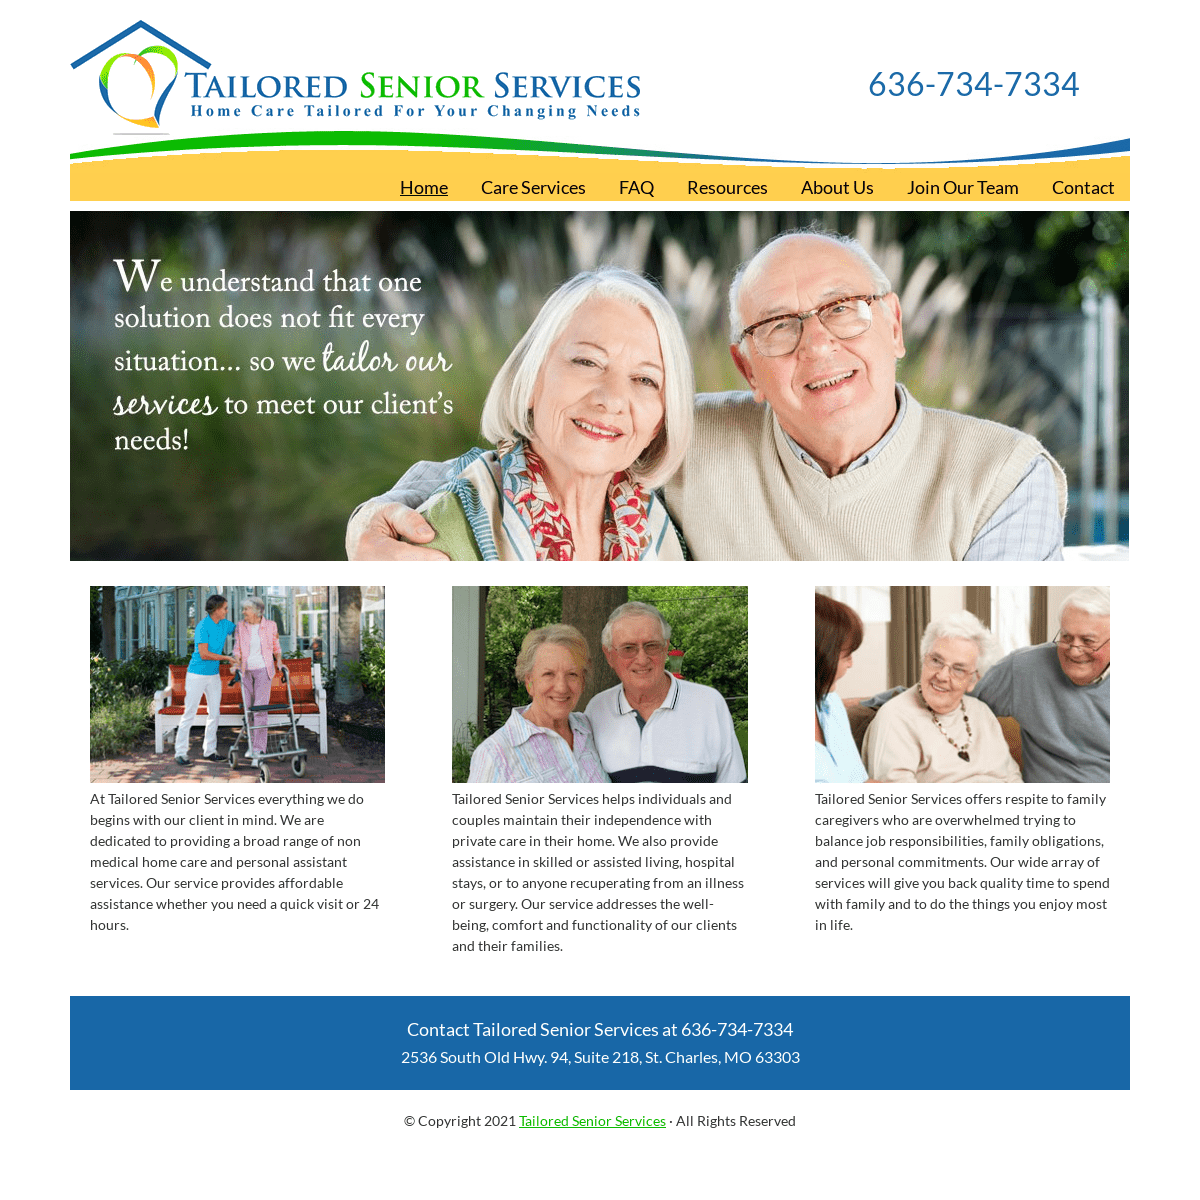 A complete backup of https://tailoredseniorservices.com